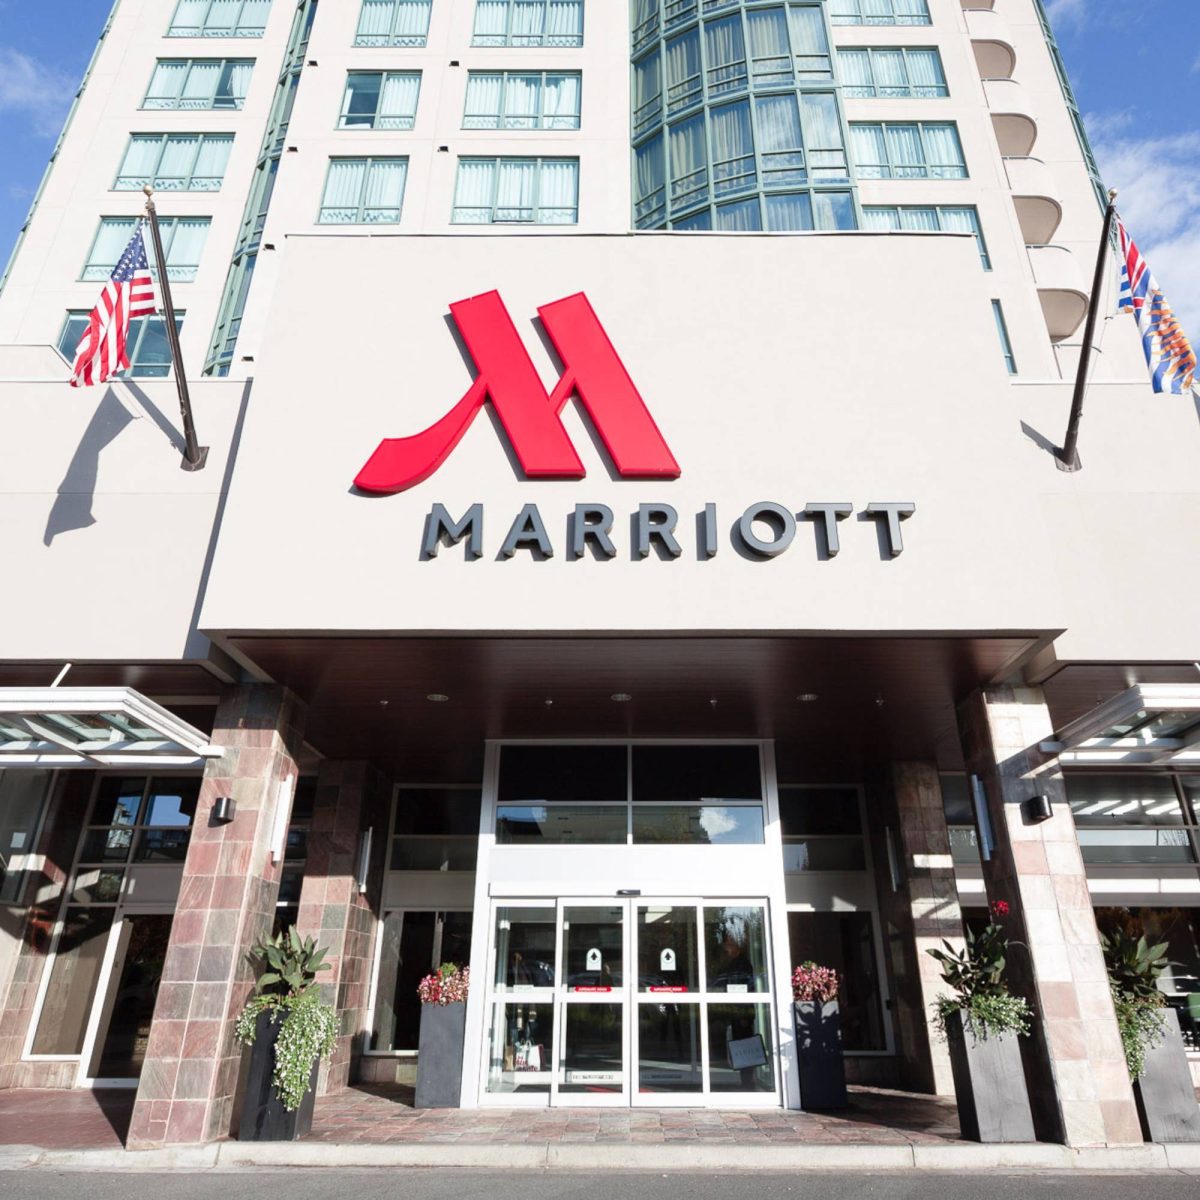 Vancouver Airport Marriott Hotel building in Richmond